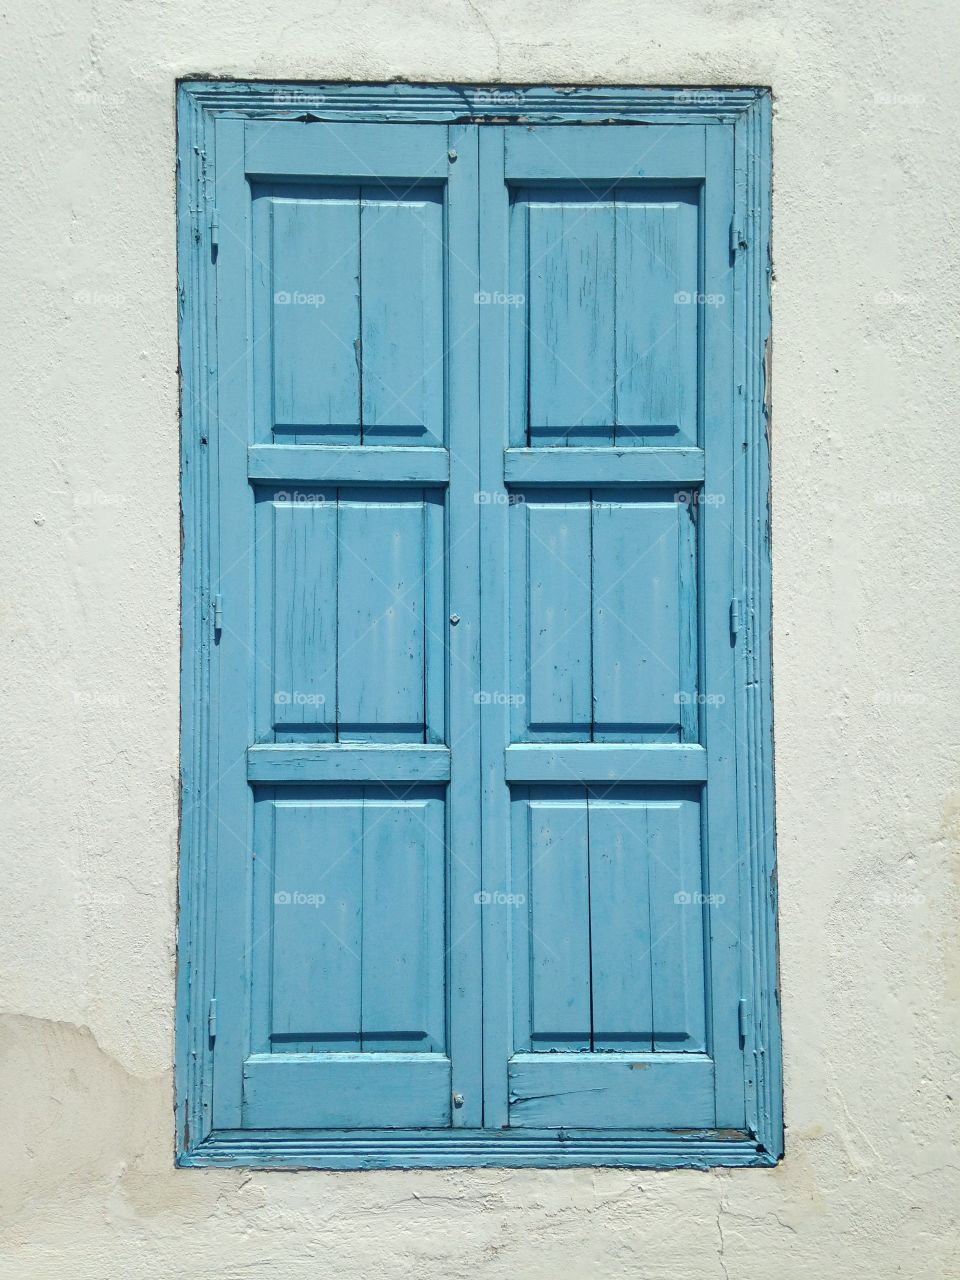 Glossa Shutters. Baking hot day in Glossa on Skopelos. Anyone sensible is behind closed shutters. 